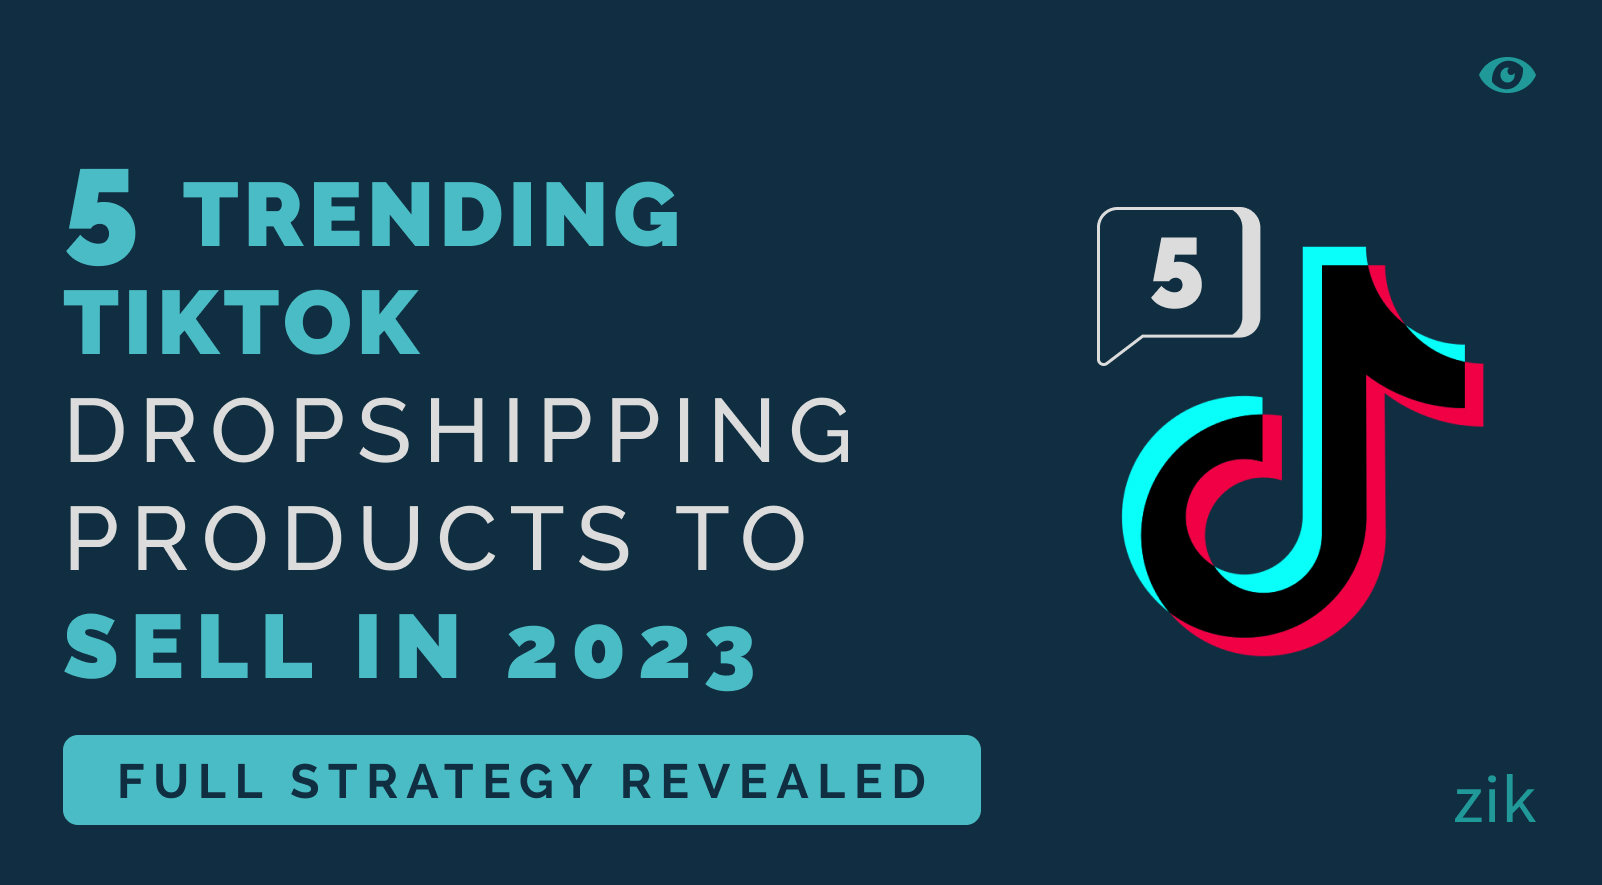 5 Trending TikTok Dropshipping Products to Sell in 2023 [Full Strategy